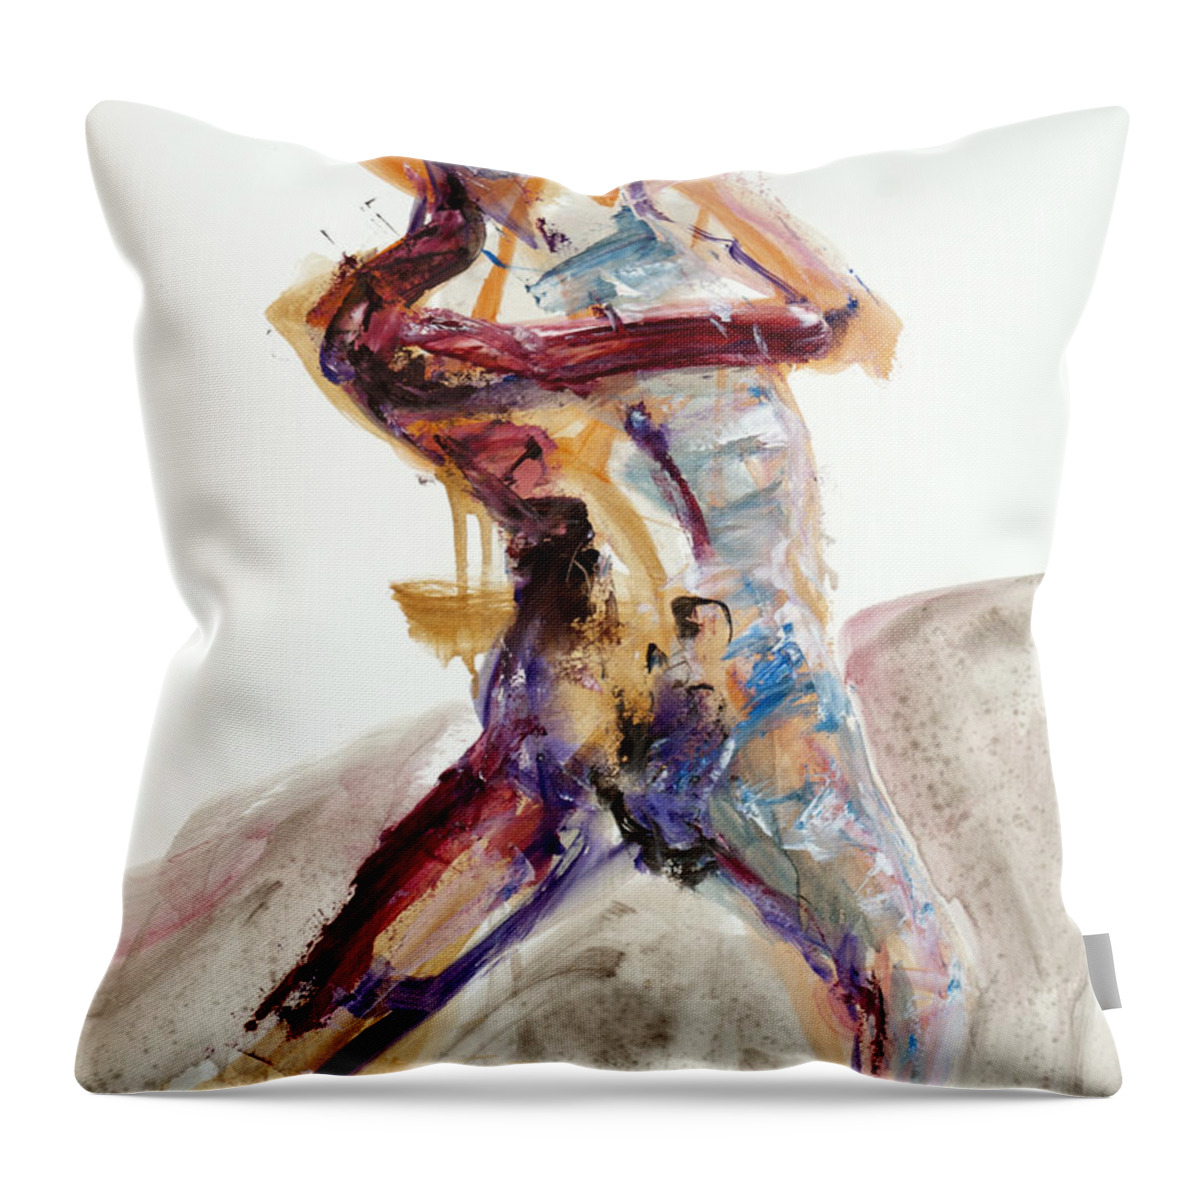 Nude Throw Pillow featuring the painting 04923 Taking Action by AnneKarin Glass